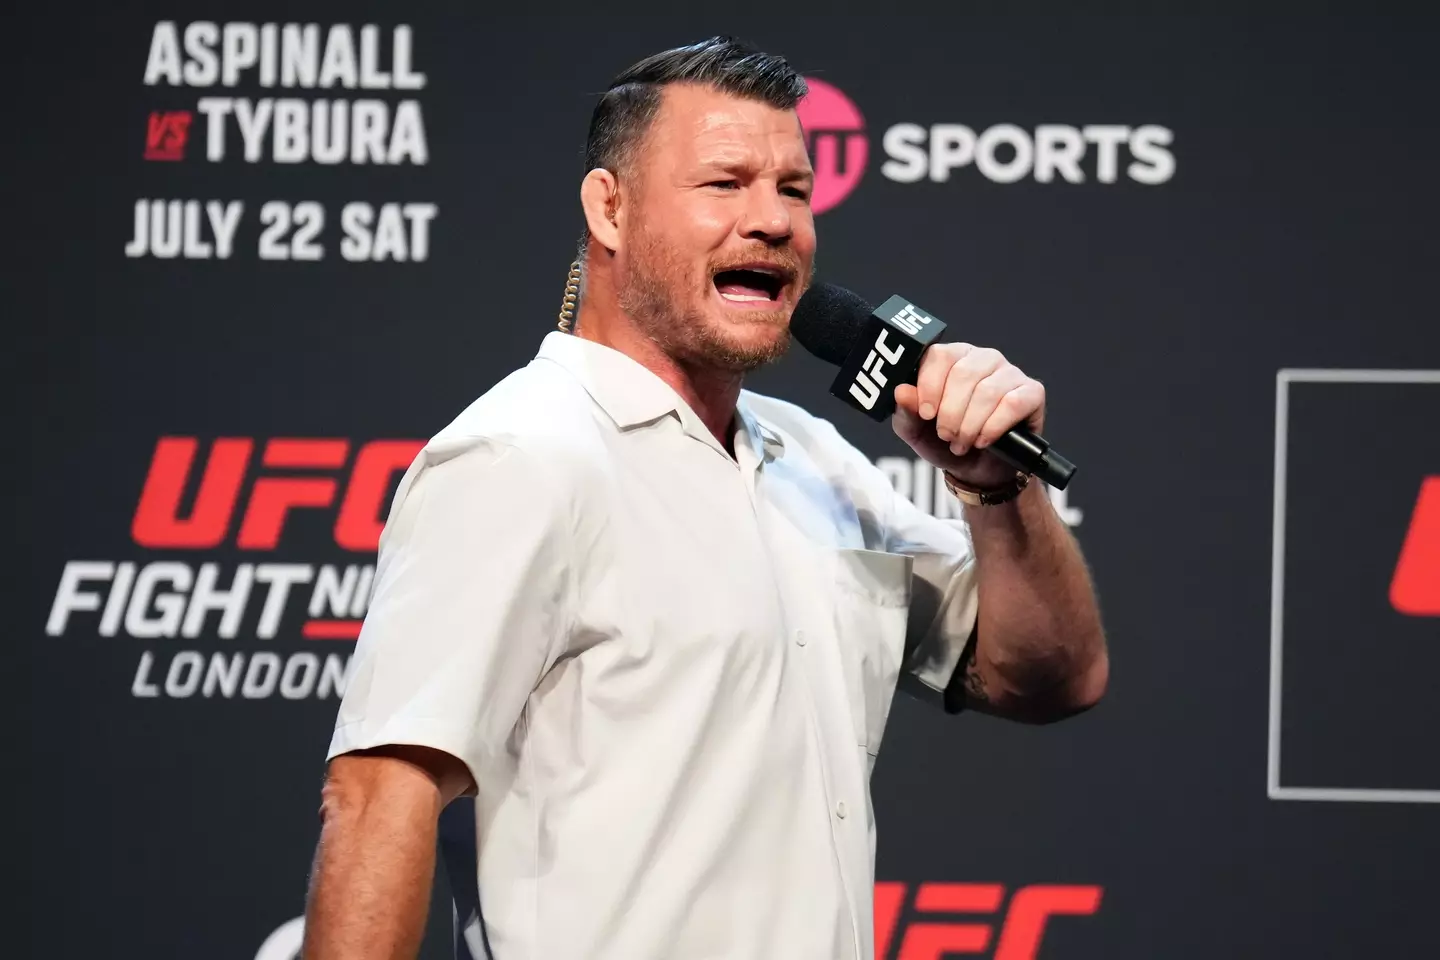 Michael Bisping during the UFC London ceremonial weigh-ins. Image: Getty